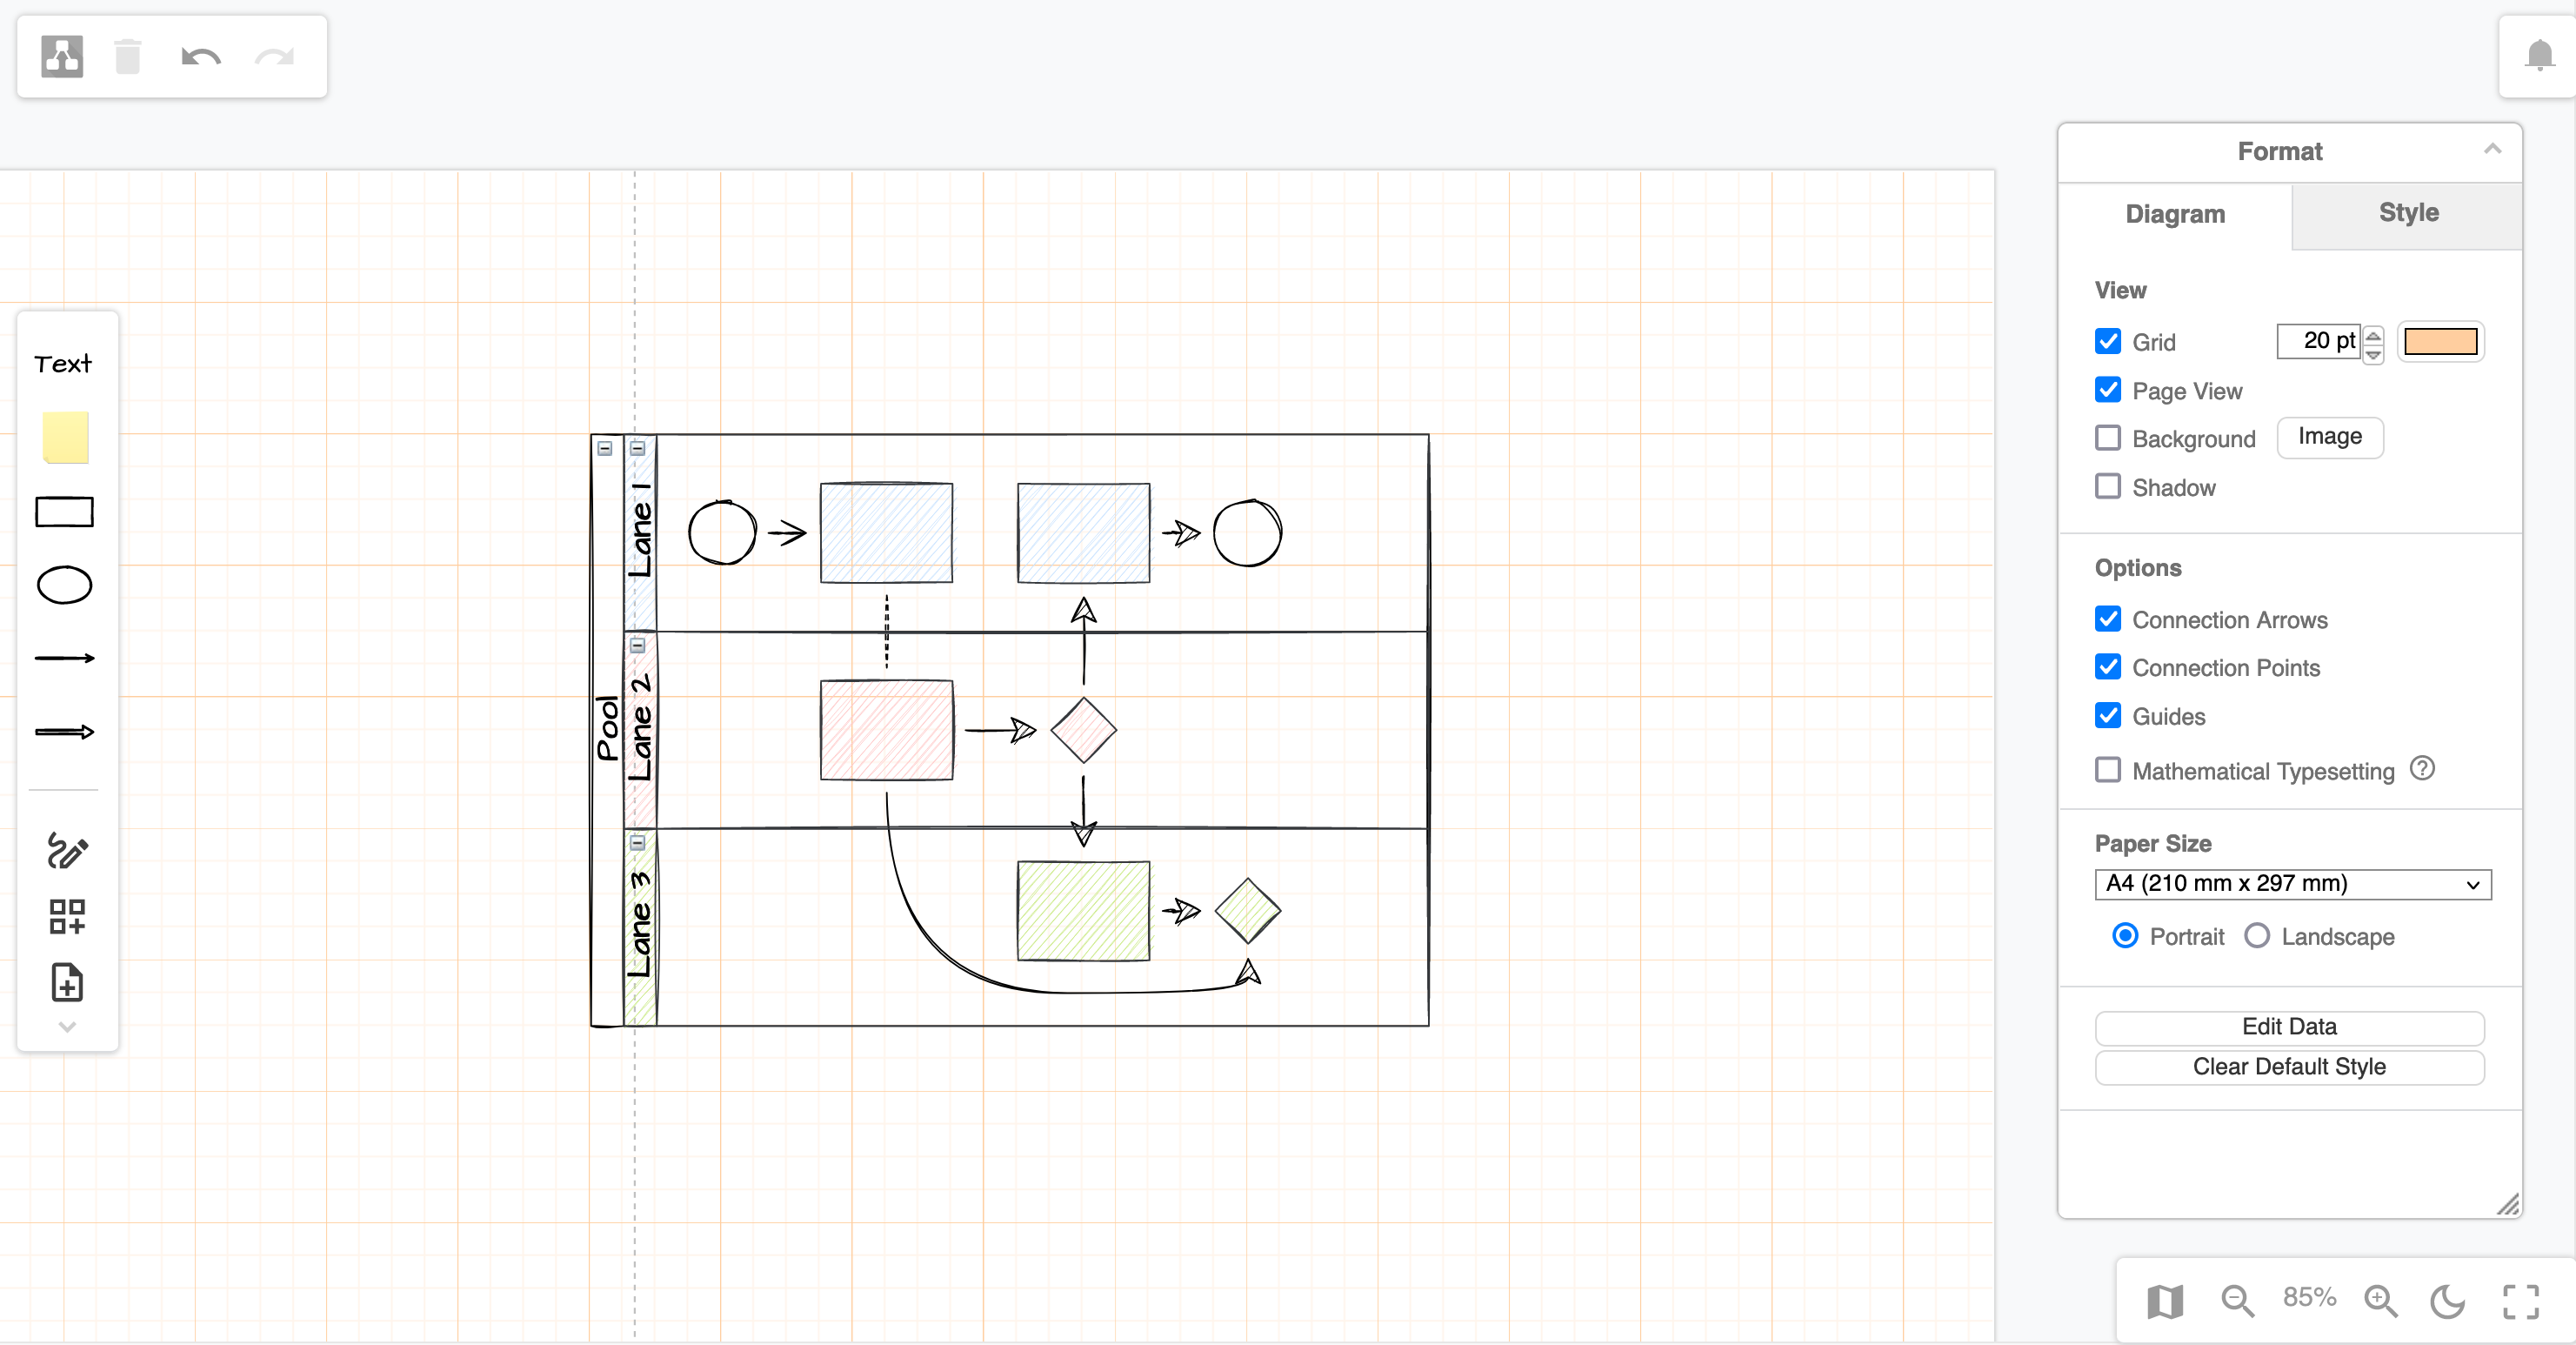 Change how the grid is displayed on the drawing canvas in draw.io